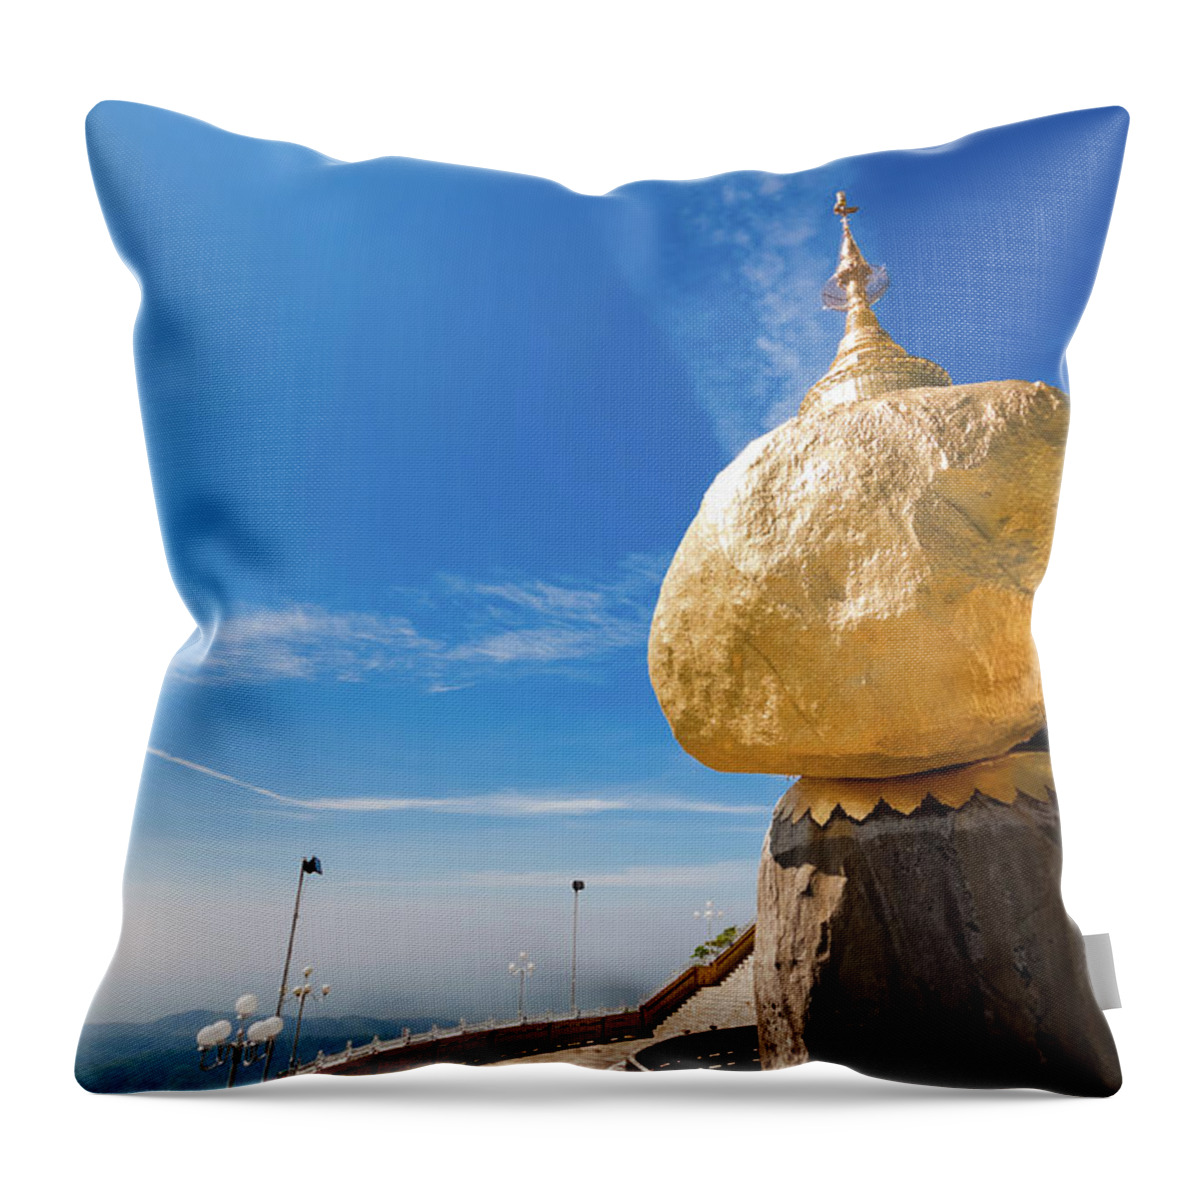 Southeast Asia Throw Pillow featuring the photograph Scenic View Of Golden Rock Kyaiktiyo by Fototrav